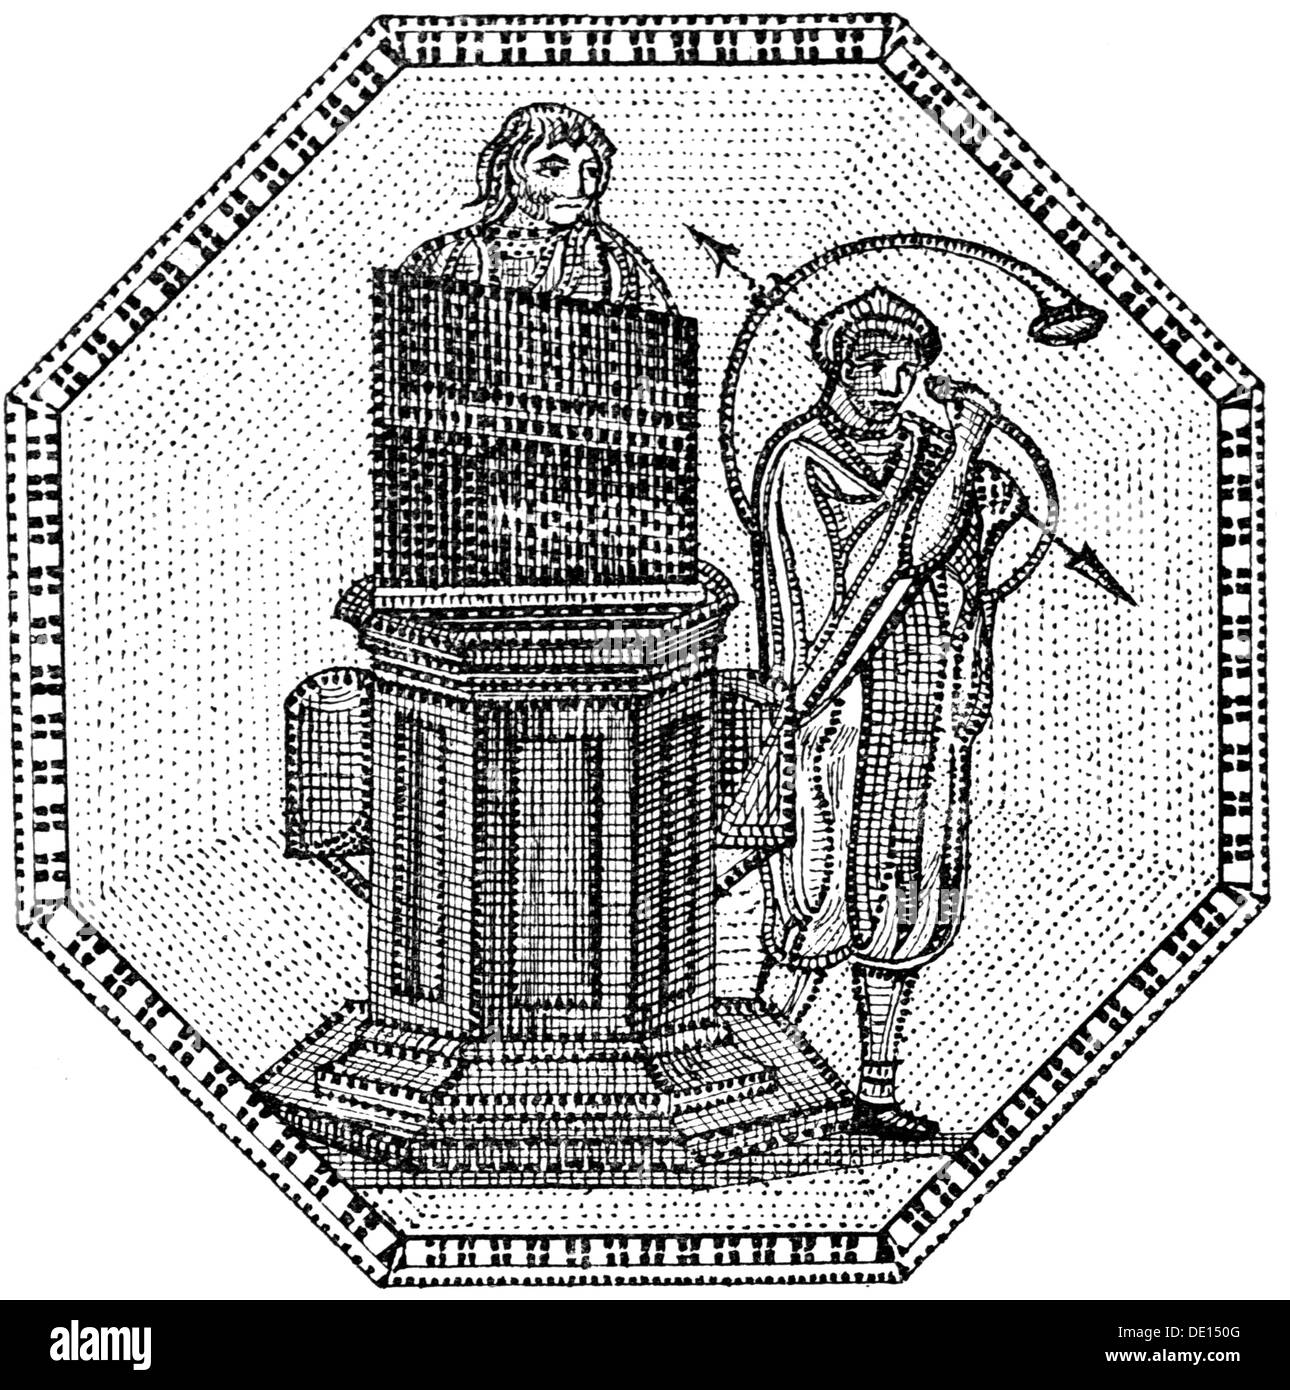 music,instruments,keyboard instrument,Roman water organ and musician with a Cornu,after mosaic,2nd / 3rd century,wood engraving,19th century,technics,hydraulics,hydraulic systems,keyboard instrument,musical instrument,musical instruments,aerophone,trump,trumpets,natural trumpet,wind instruments,wind instrument,water,water power,waterpower,hydropower,water powers,hydroelectricity,organ,organs,Hydraulis,Hydraulos,organ pipe,organ pipes,technology,technologies,ancient world,ancient times,Roman Empire,Roman,Romans,machine,mac,Additional-Rights-Clearences-Not Available Stock Photo